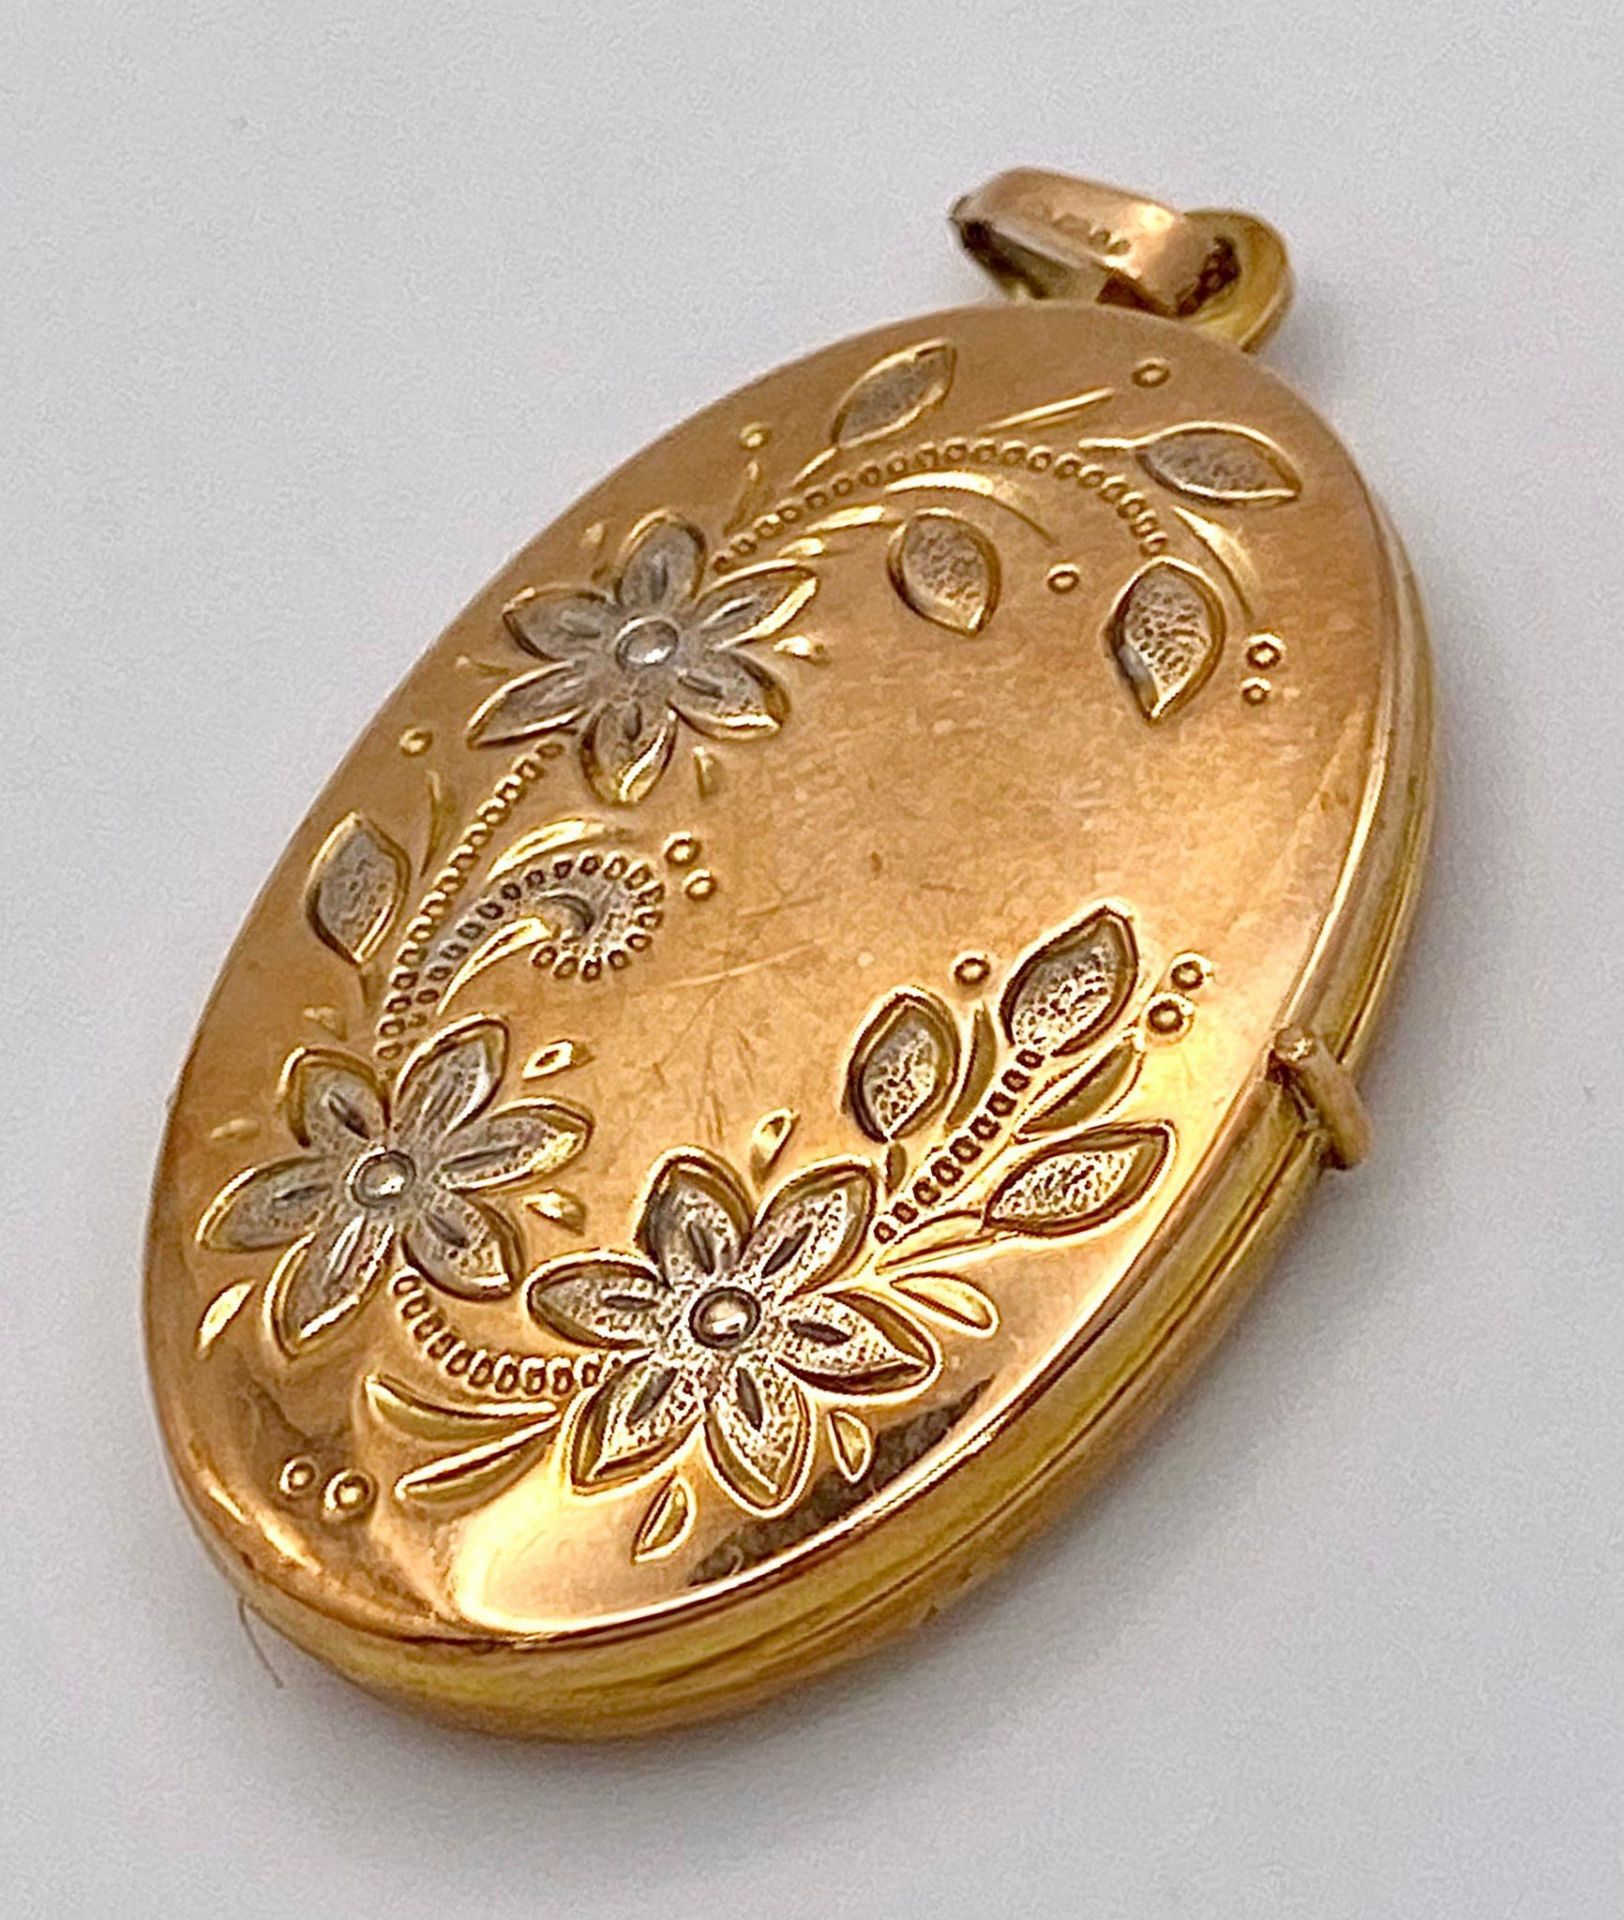 A Vintage 9K Yellow and White Gold Locket Pendant. 4.5cm. 5.1g total weight.